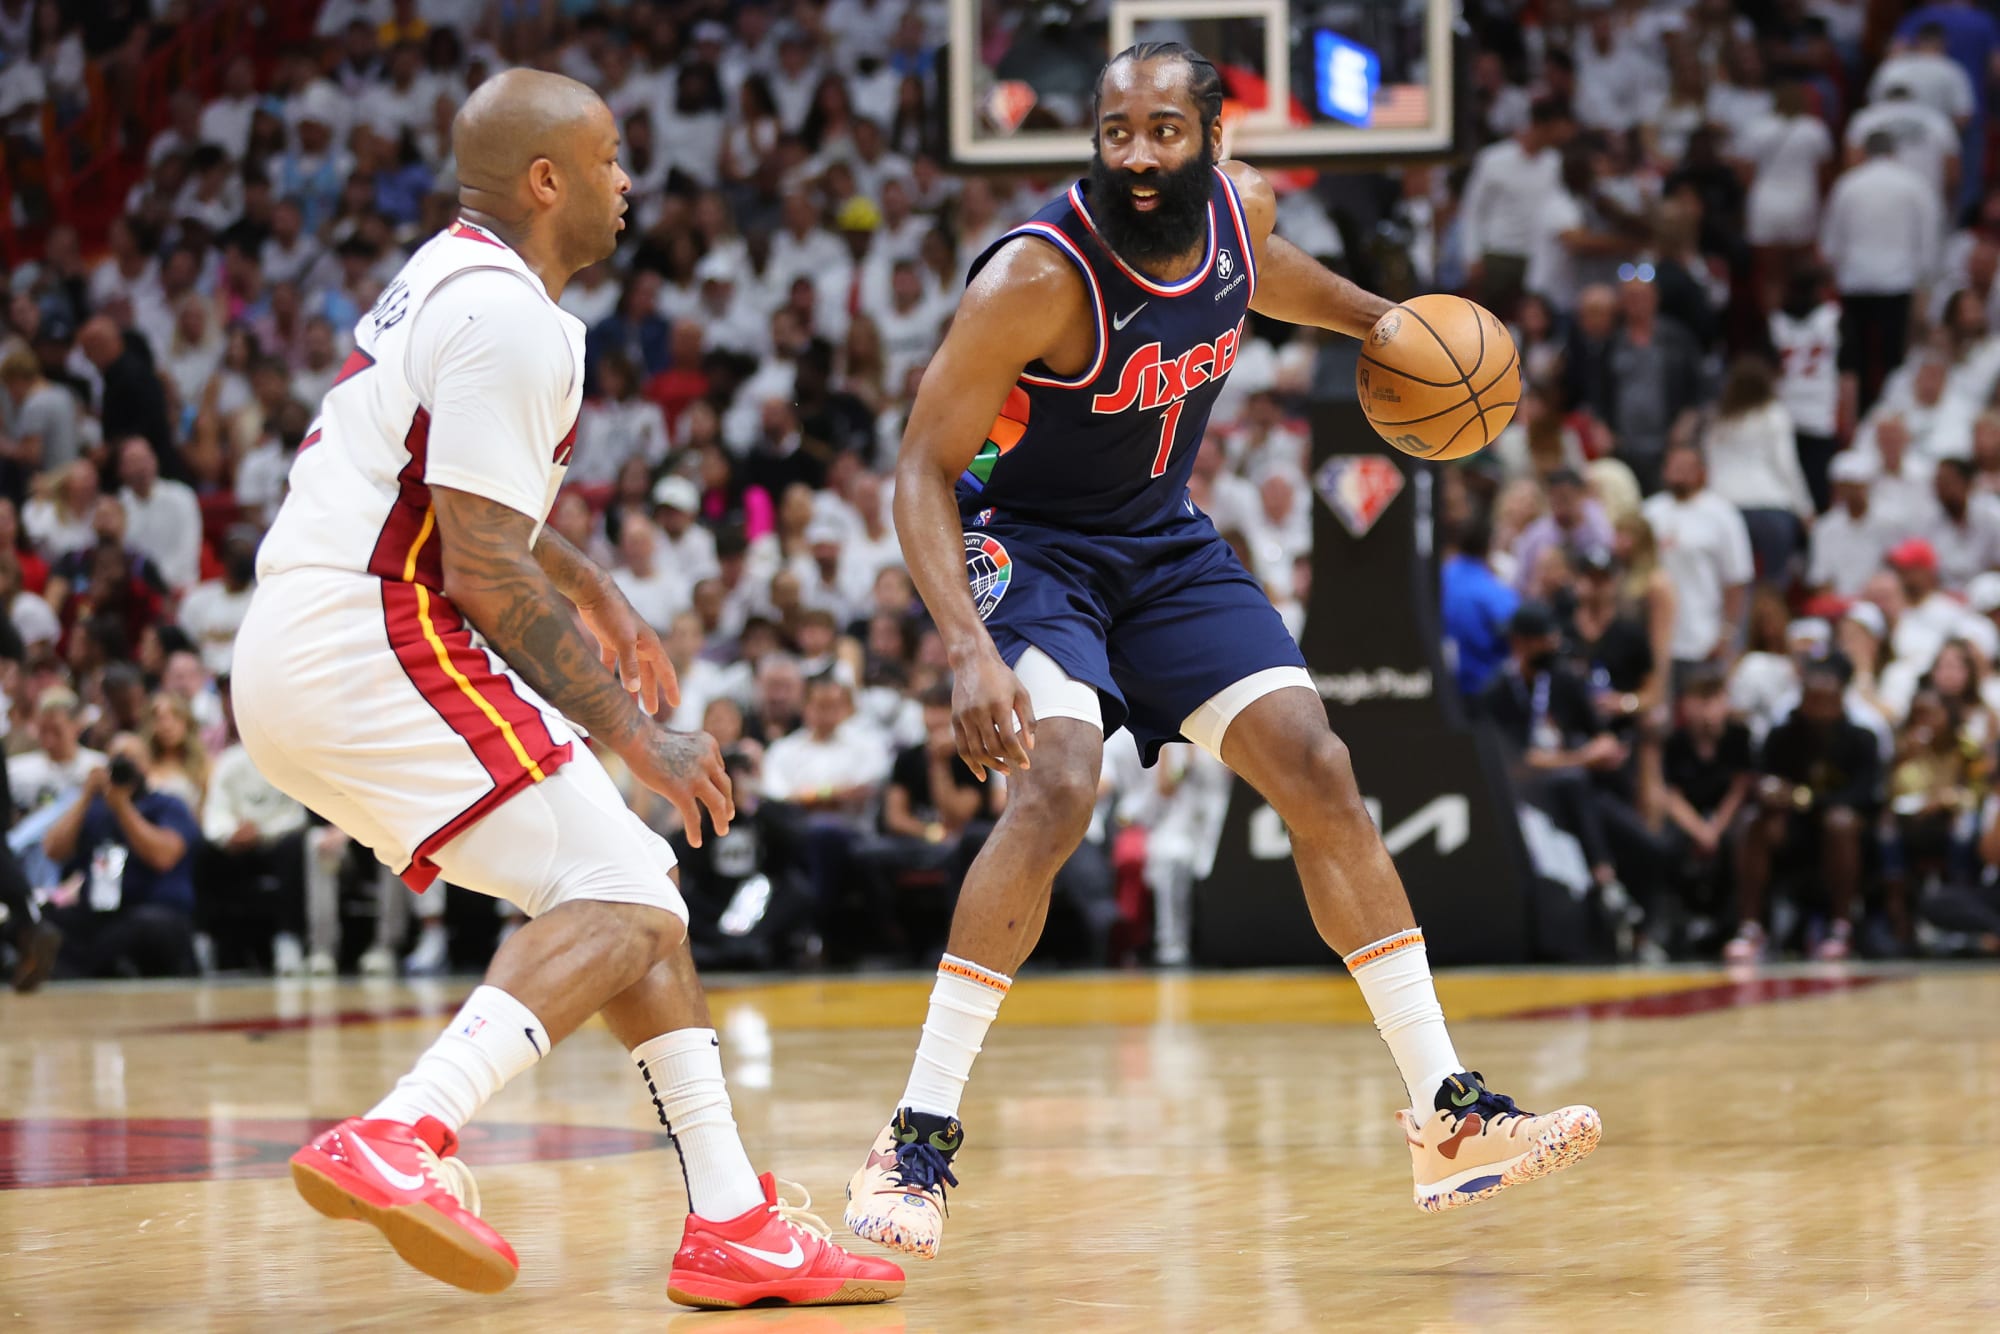 Miami Heat: We’ll wait a while to see P.J. Tucker back in FTX Arena